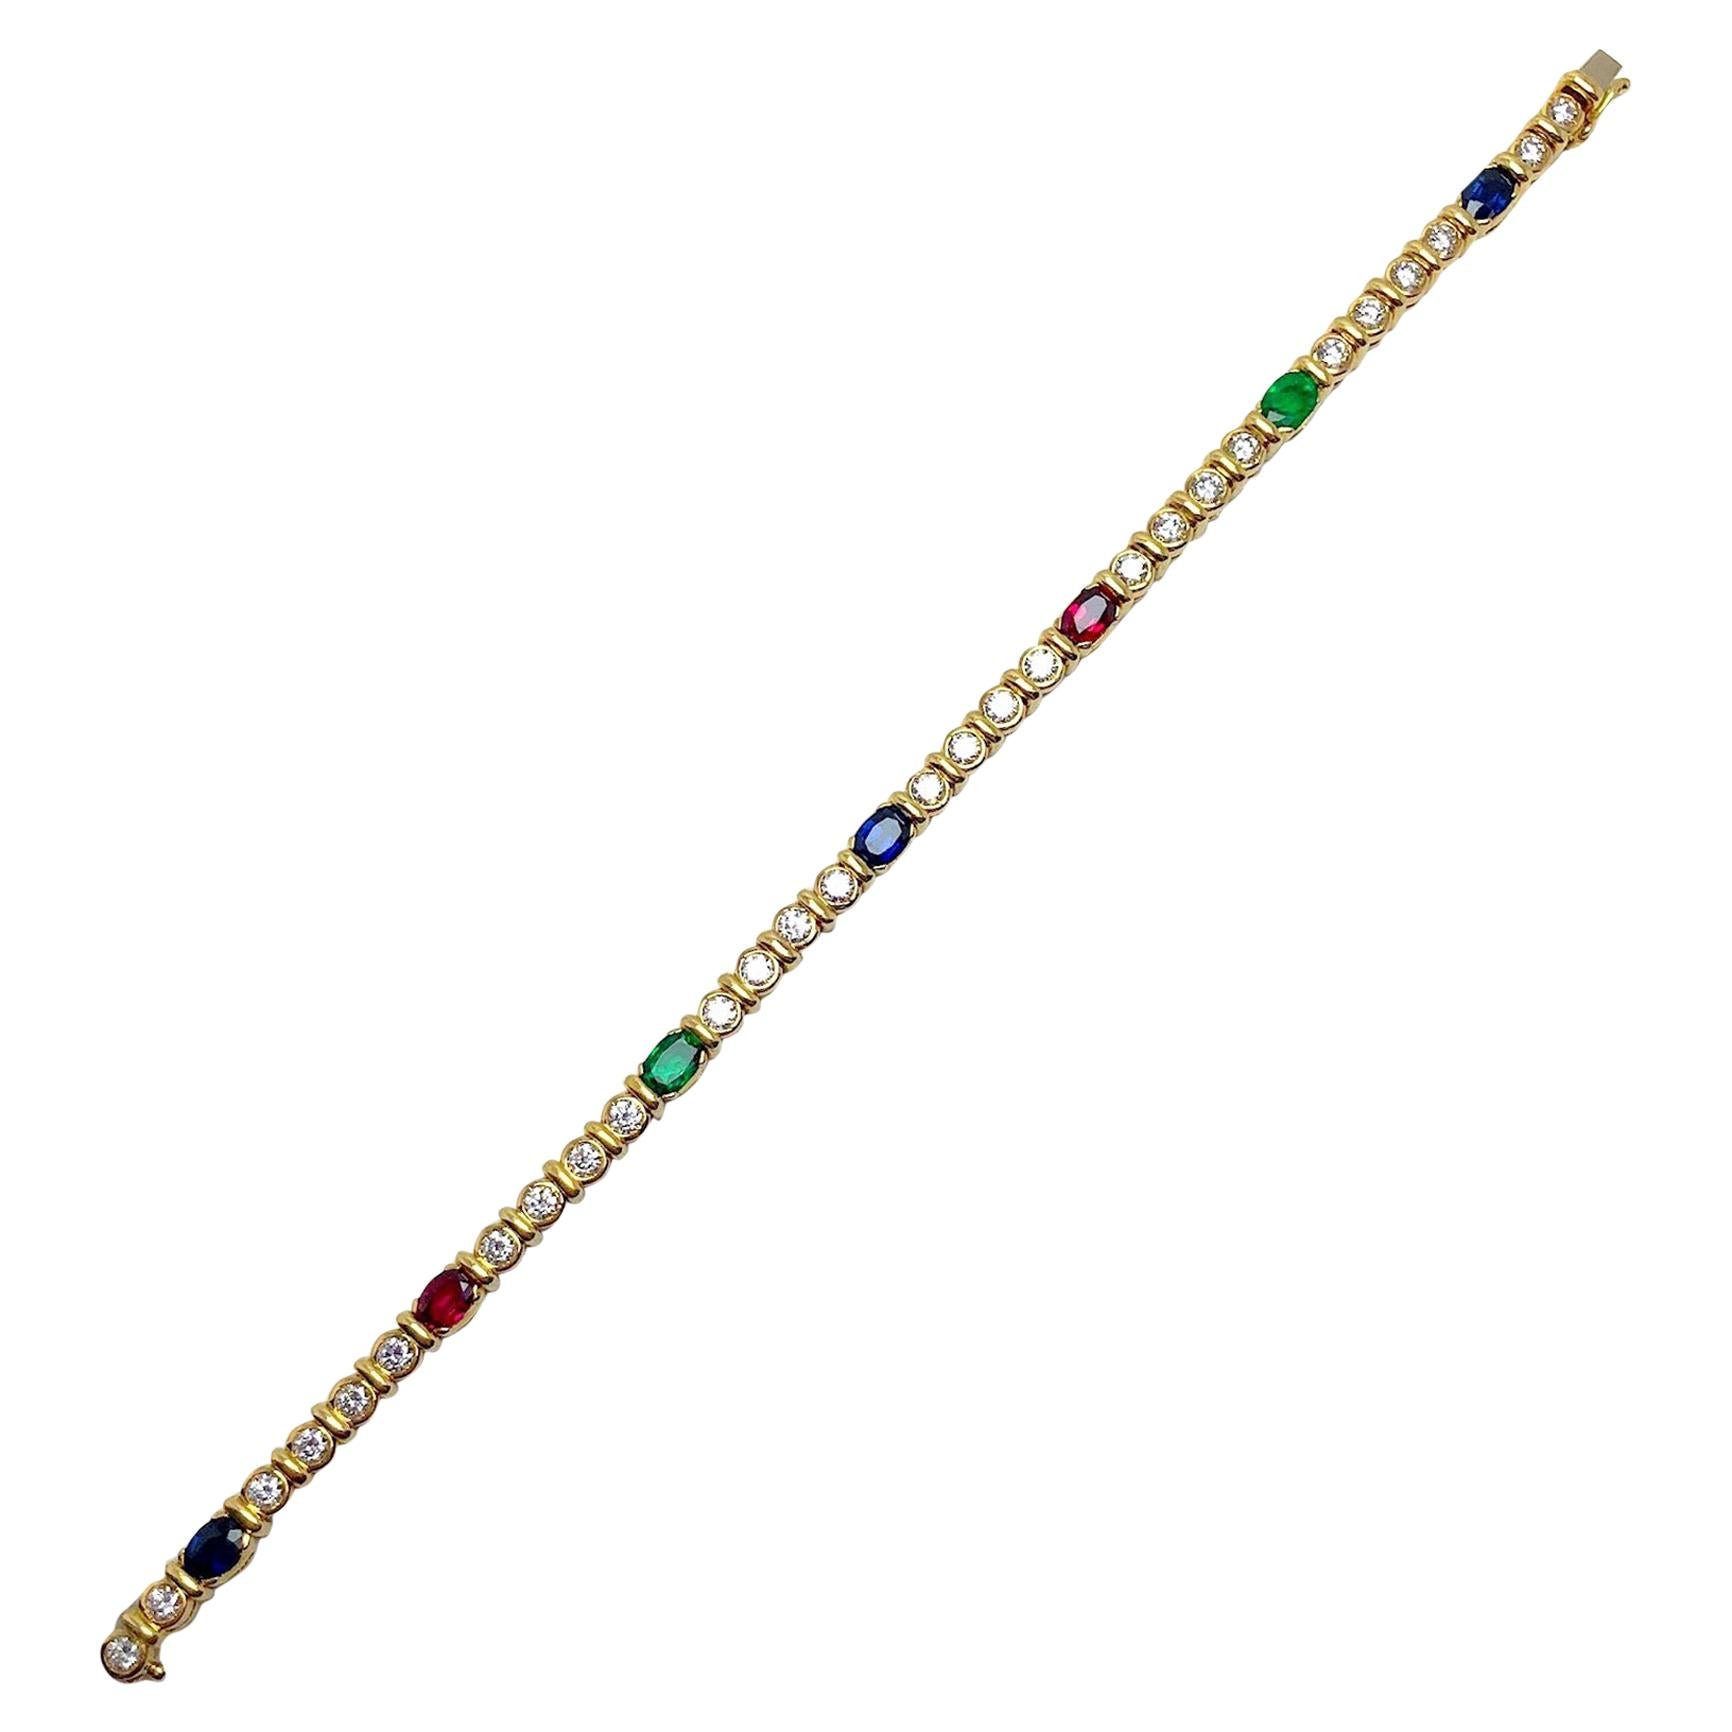 Barzizza 18KT Yellow Gold Bracelet with Diamonds, Rubies, Emeralds and Sapphires For Sale